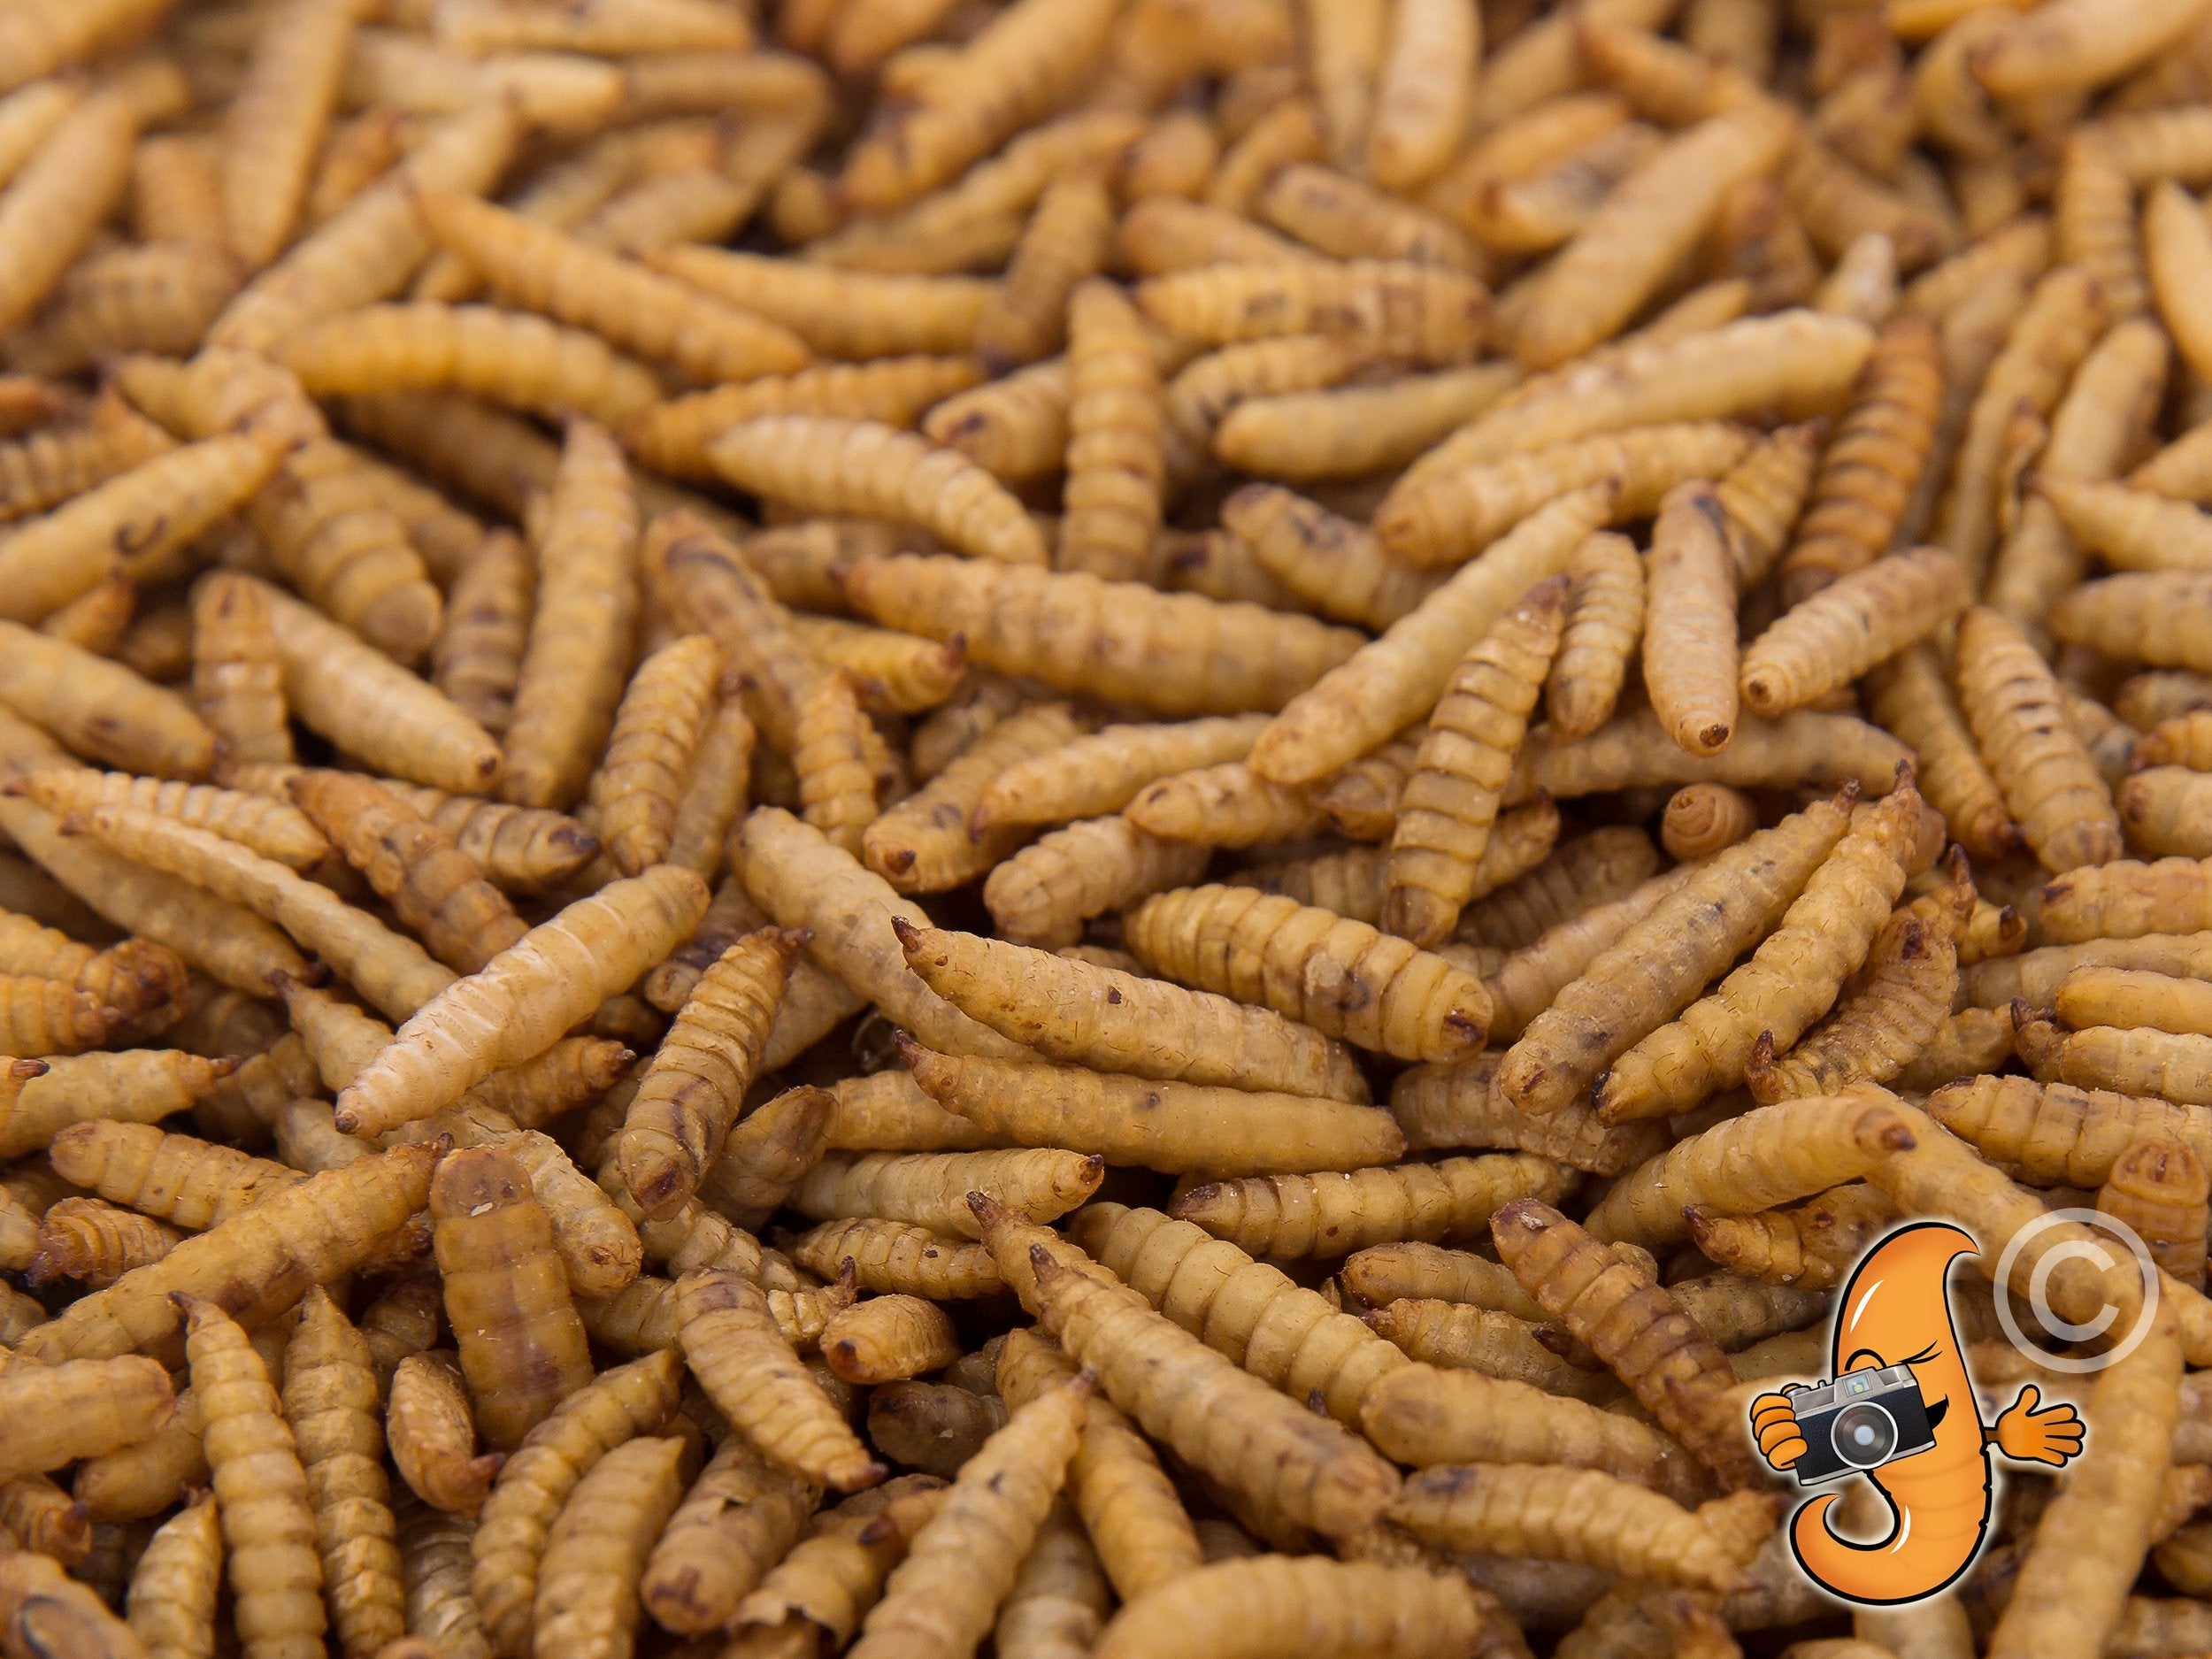 5LB Chubby Dried Black Soldier Fly Larvae - MADE IN THE USA - Chubby Mealworms